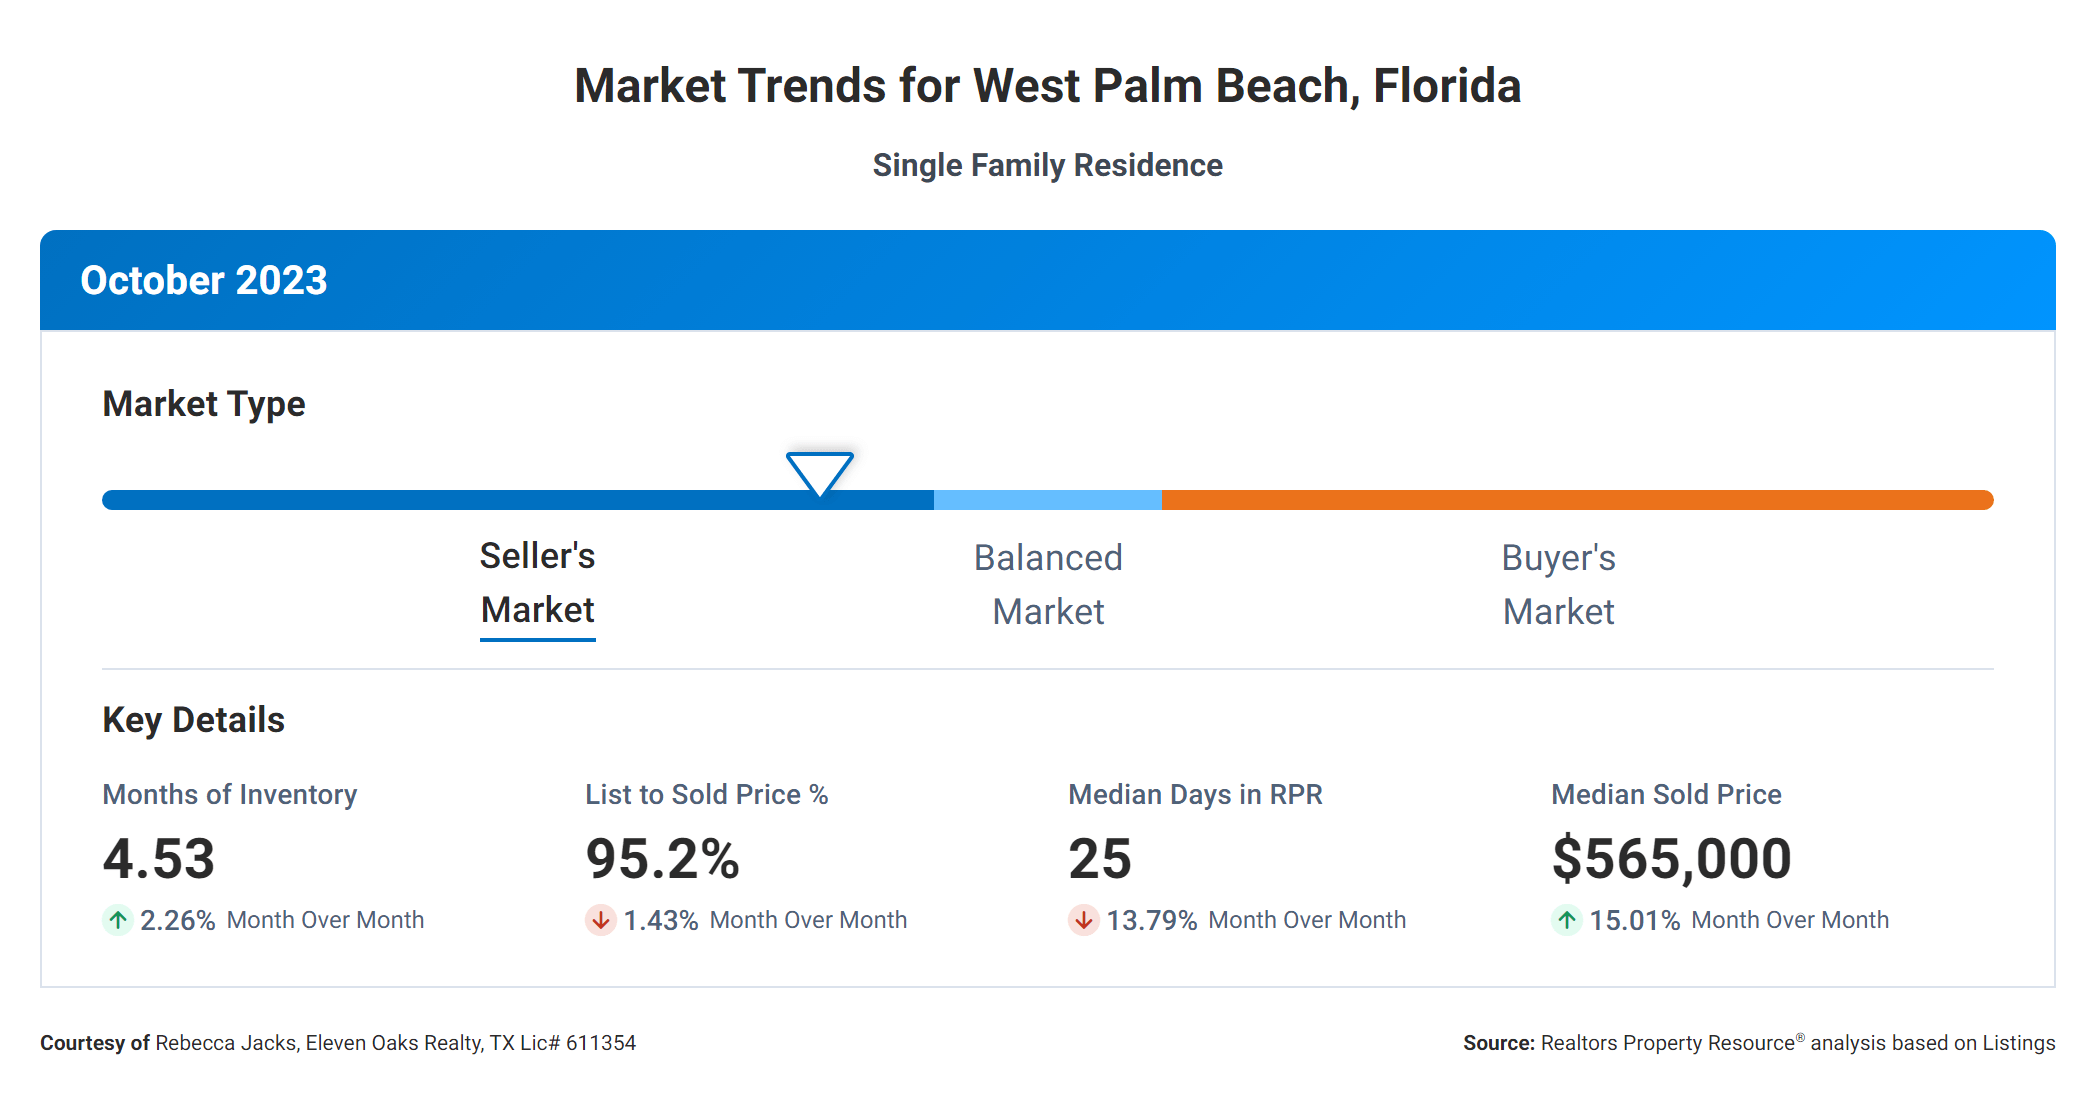 October 2023 market trends for west palm beach Florida